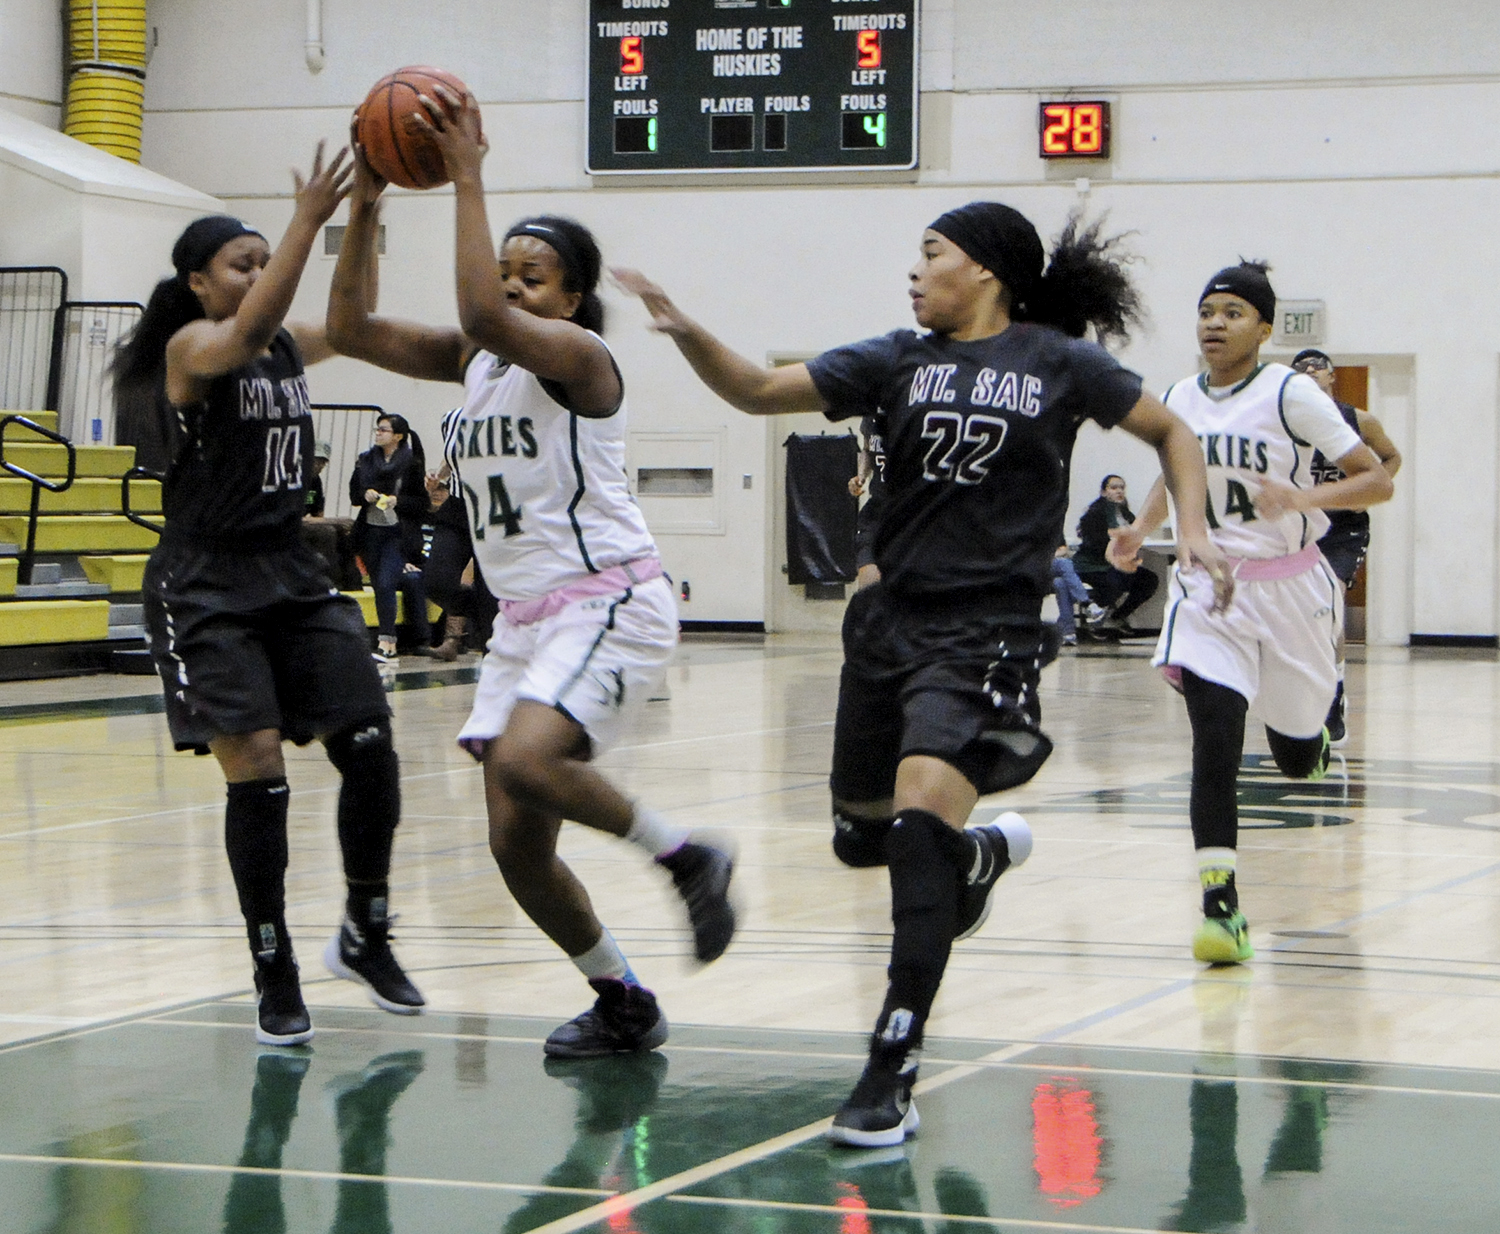 East Los Angeles College sophomore forward Jasmine Gates attempts a shot while driving in the paint in an 82-72 loss to Mt. SAC on Jan. 22. (Photo by DeeDee Jackson)